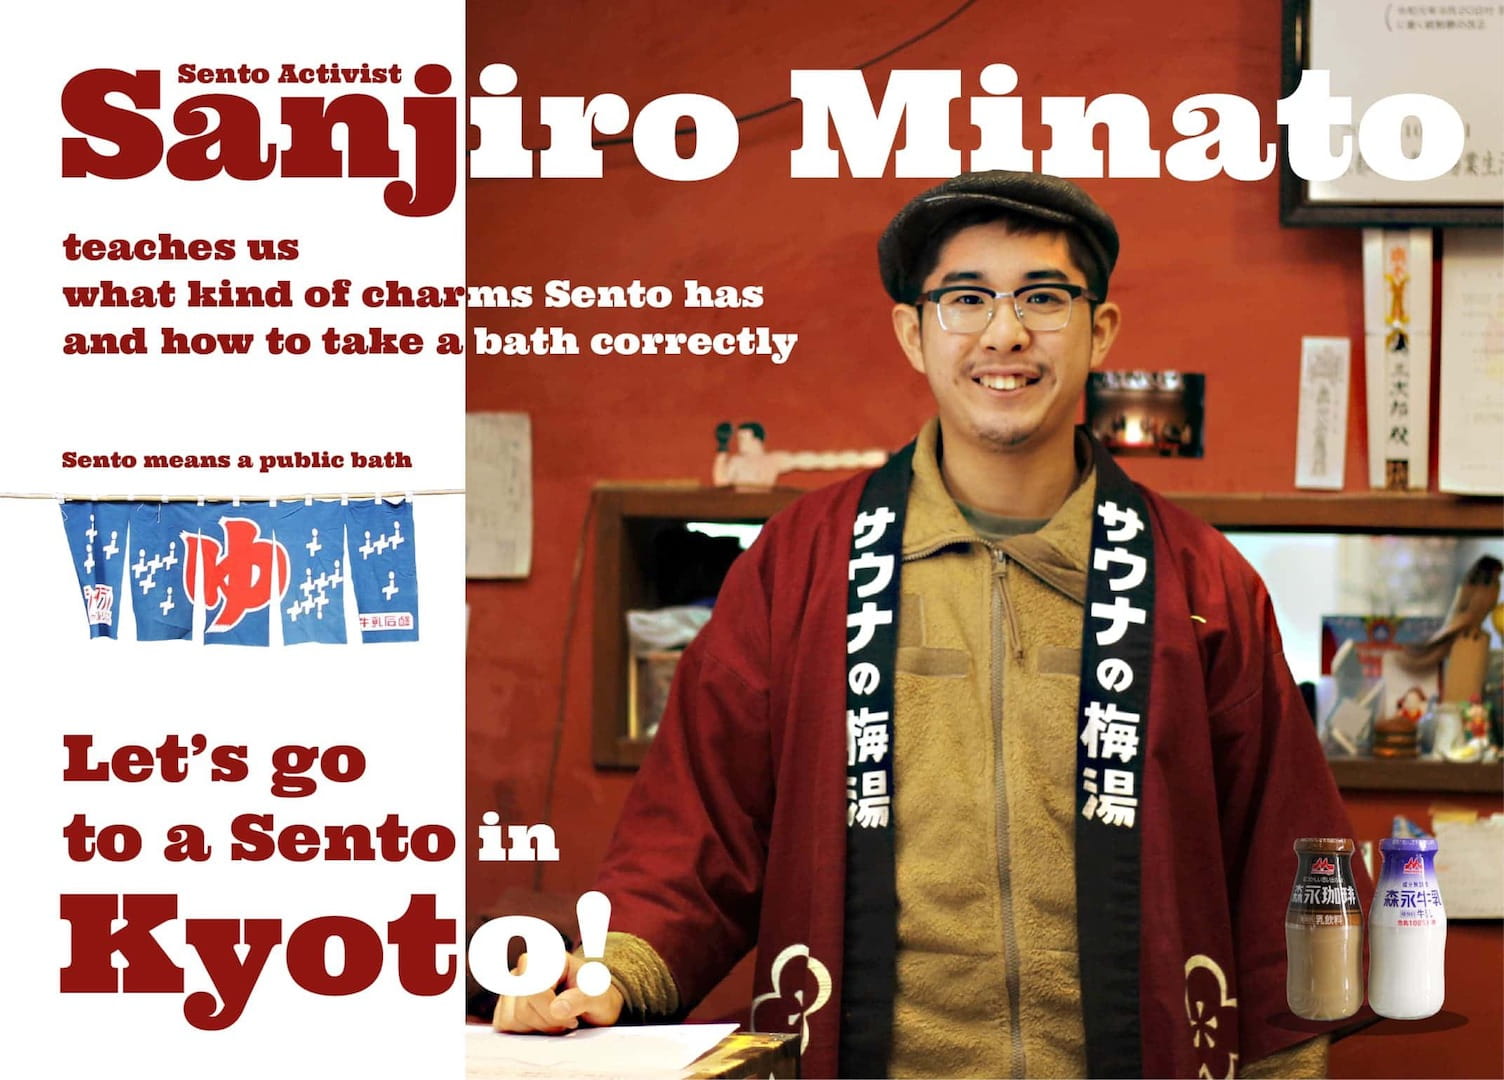 Let’s go to a Sento(a public bath) in Kyoto! Sento Activist, Sanjiro Minato teaches us what kind of charms Sento has and how to take a bath correctly